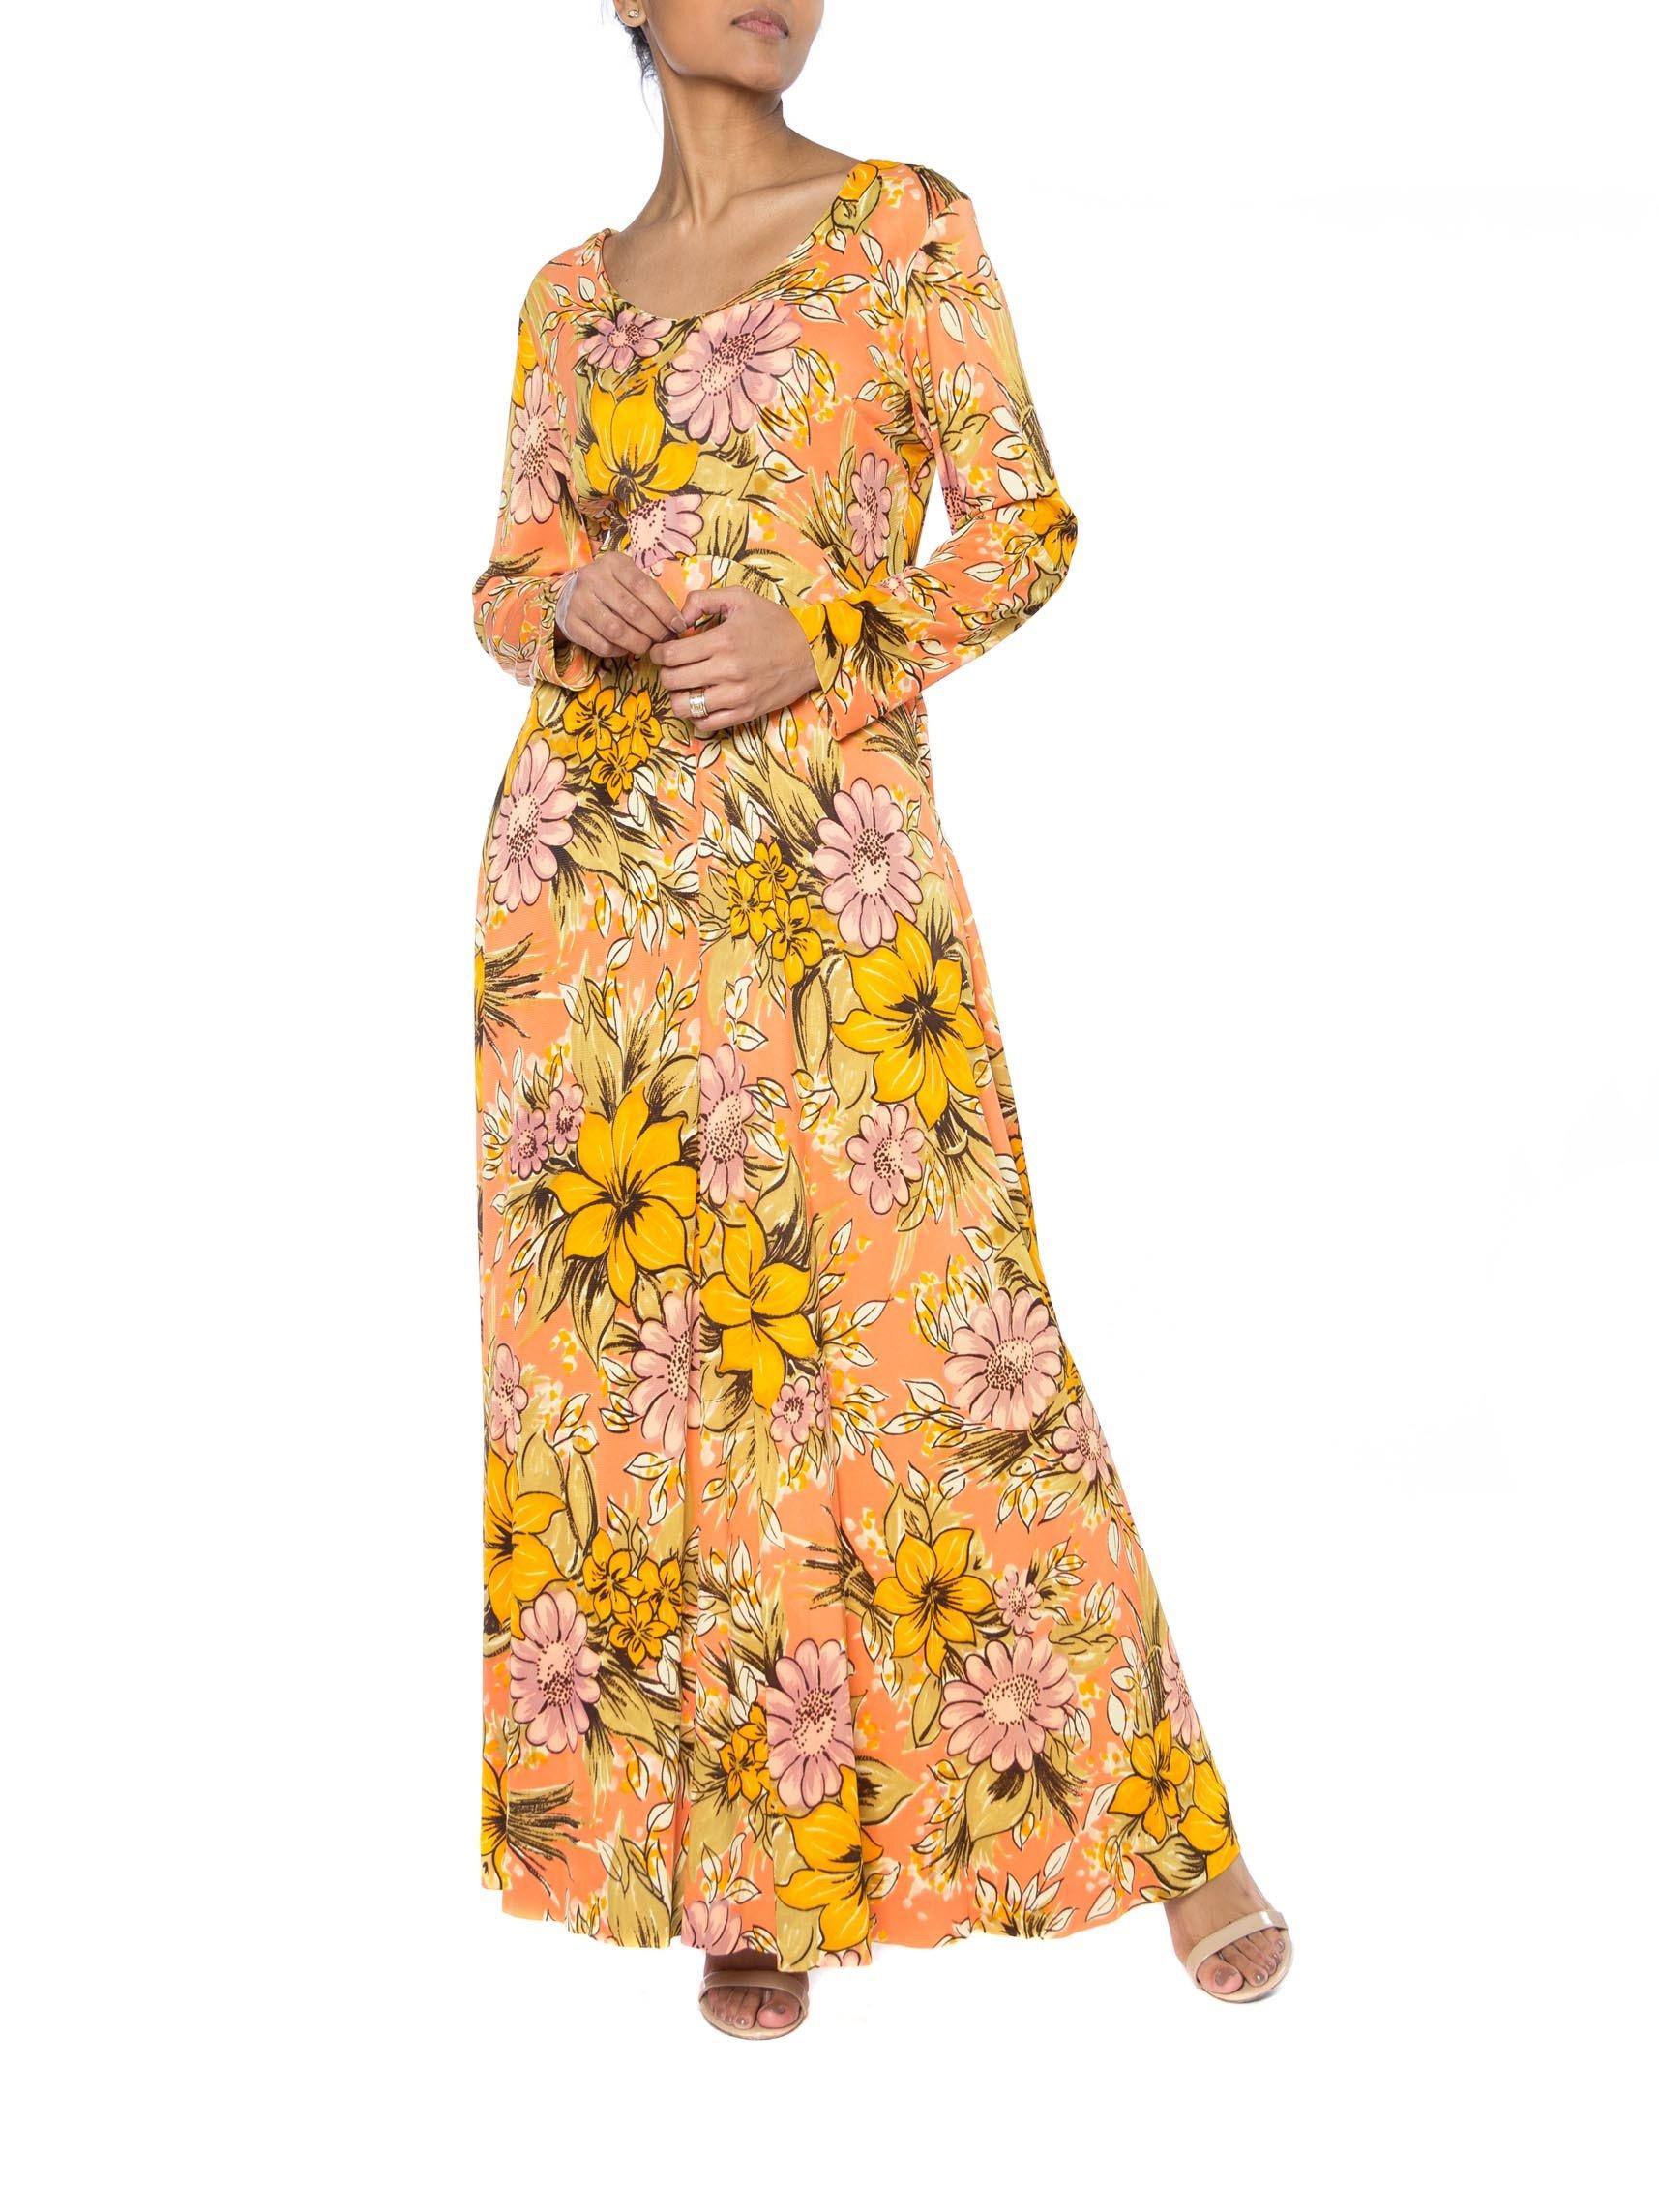 1960S AVALON Orange Polyester Long Floral Print Dress In Excellent Condition For Sale In New York, NY